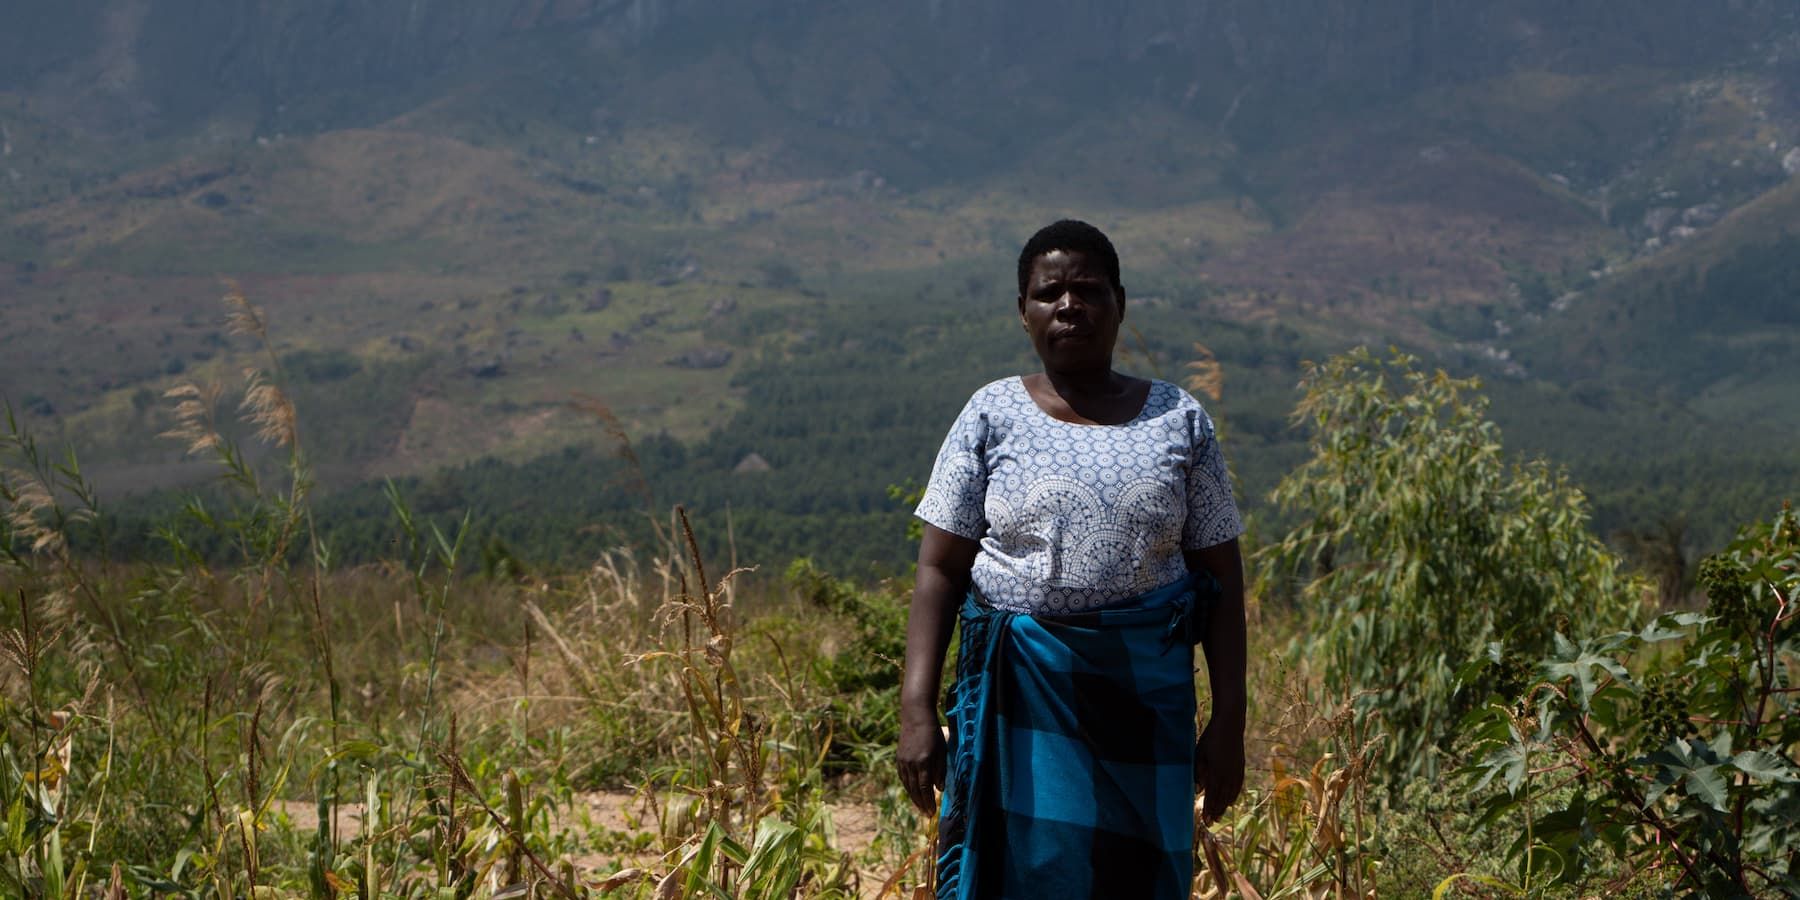 Enife Matemba stands in her destroyed field in Mulanje, Malawi